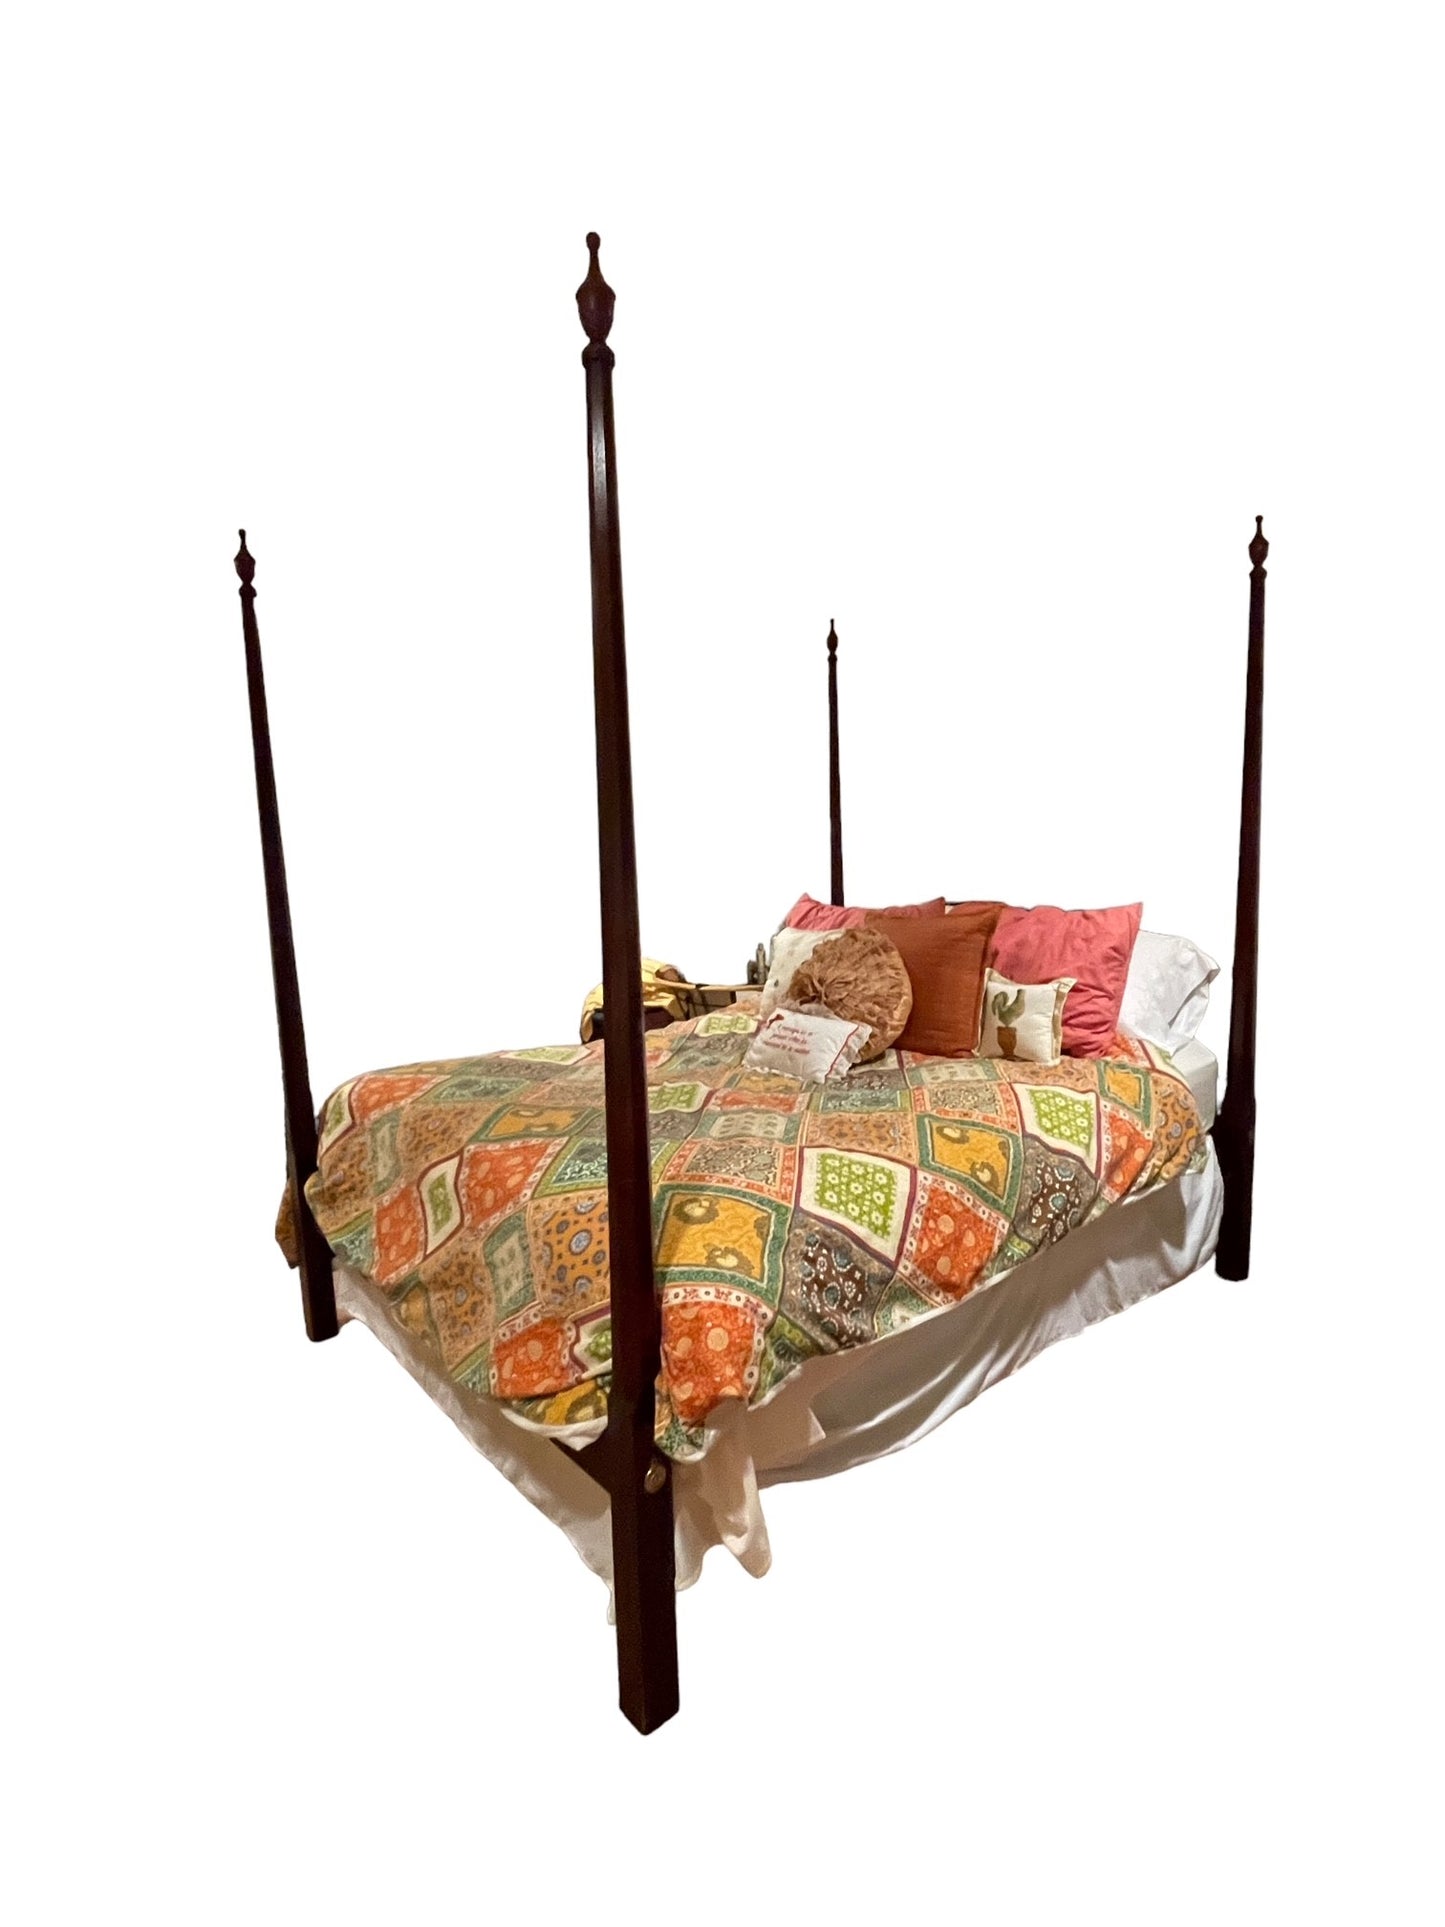 Tradition Pencil Four Poster Queen Wood Bed TM193-20